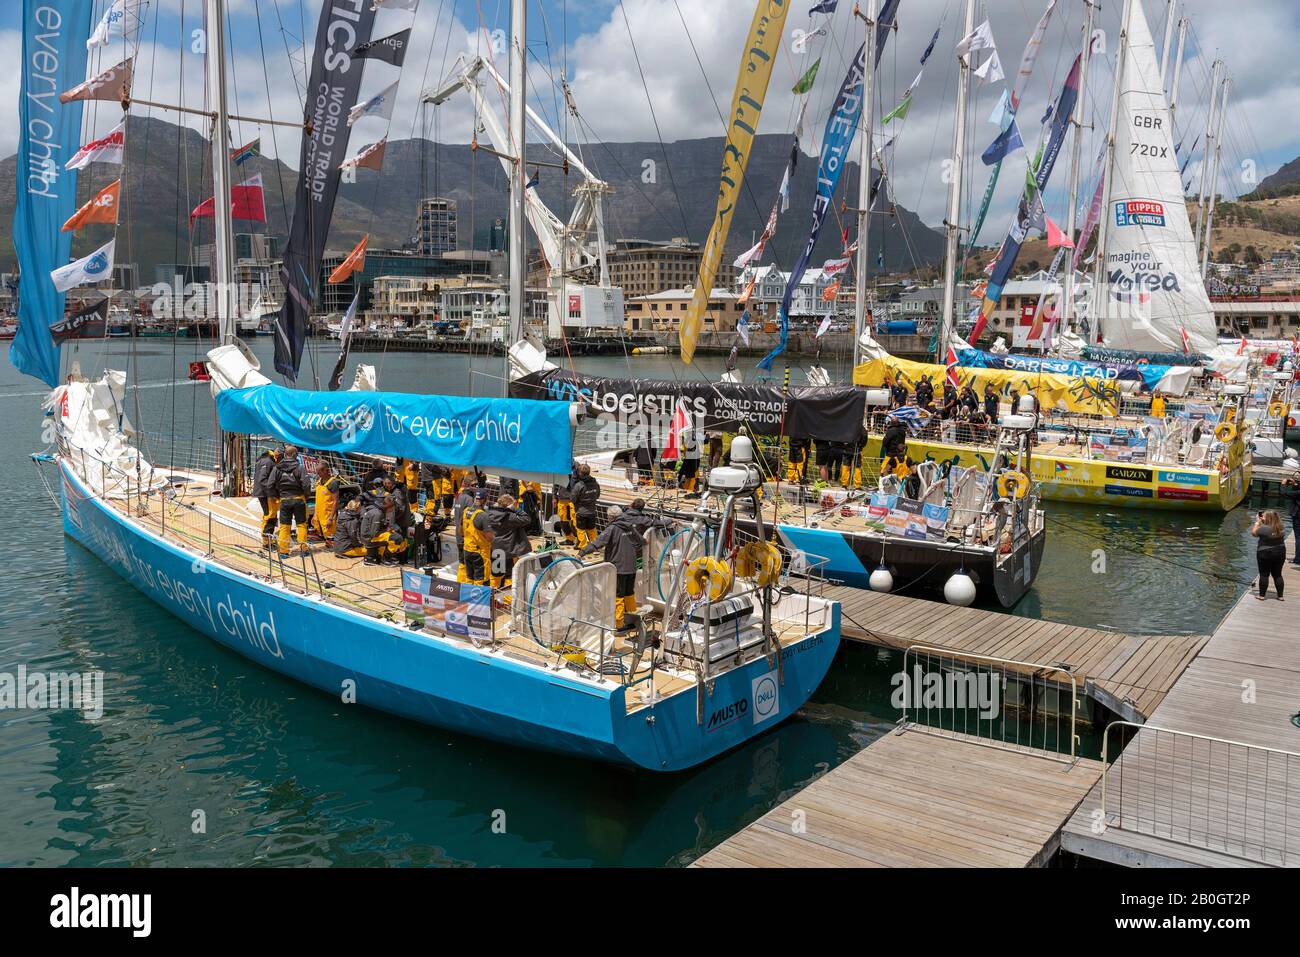 Clipper Round the World Race departs Cape Town and heads to